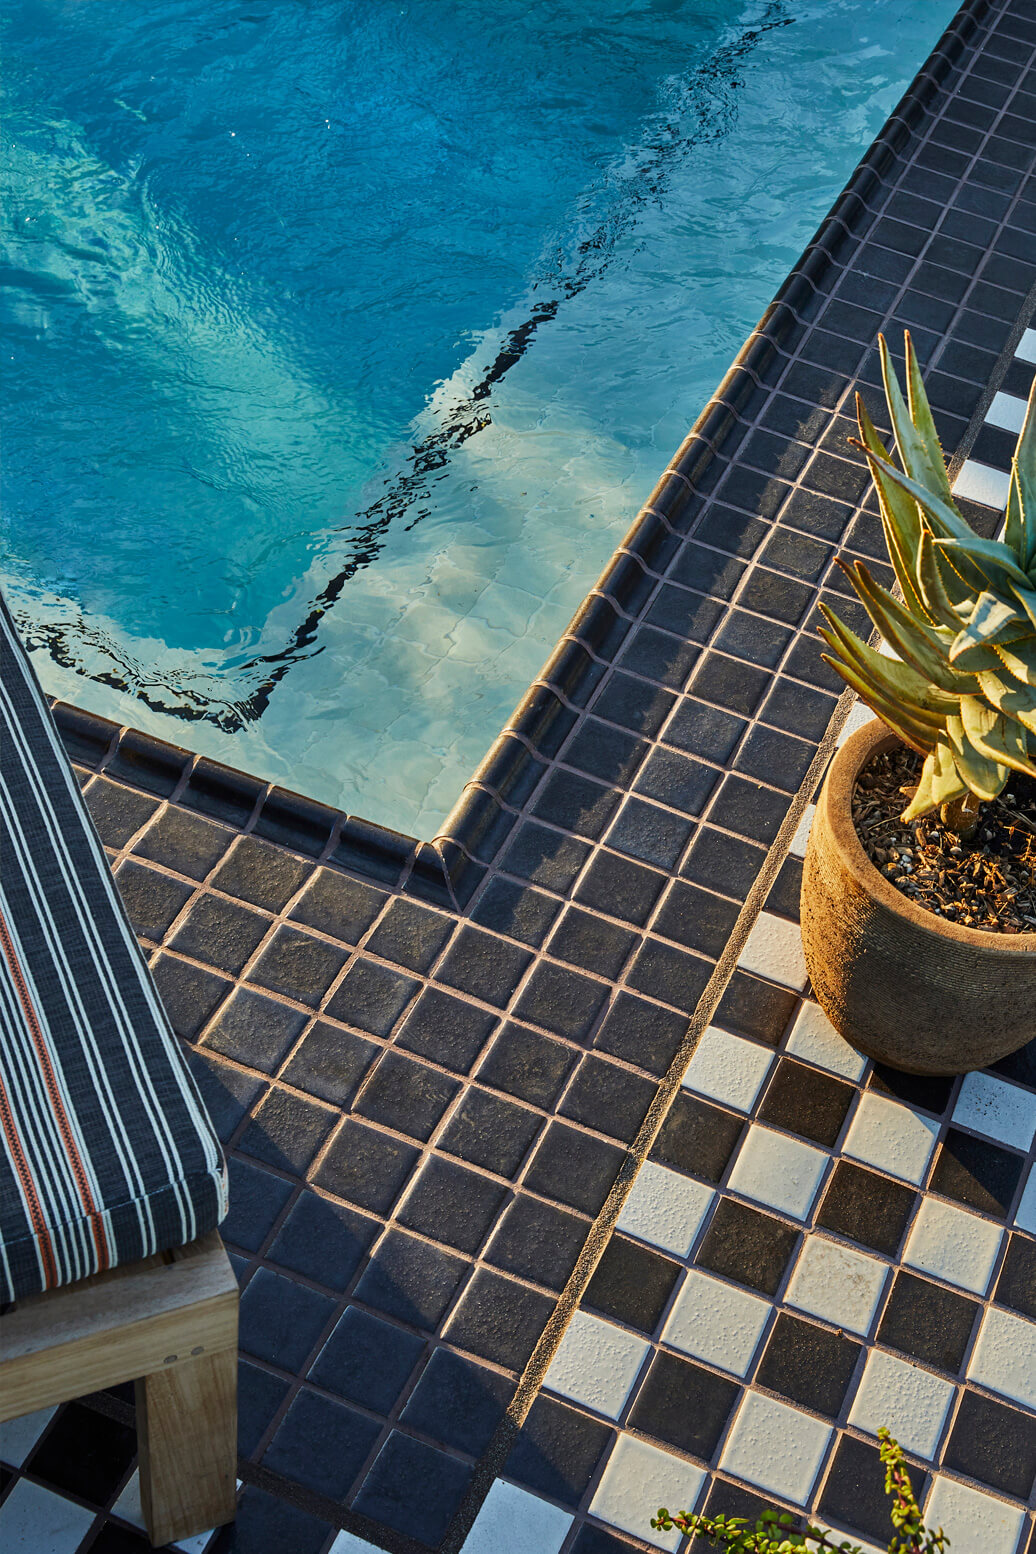 Detail image of rooftop pool with plants on tiled floor